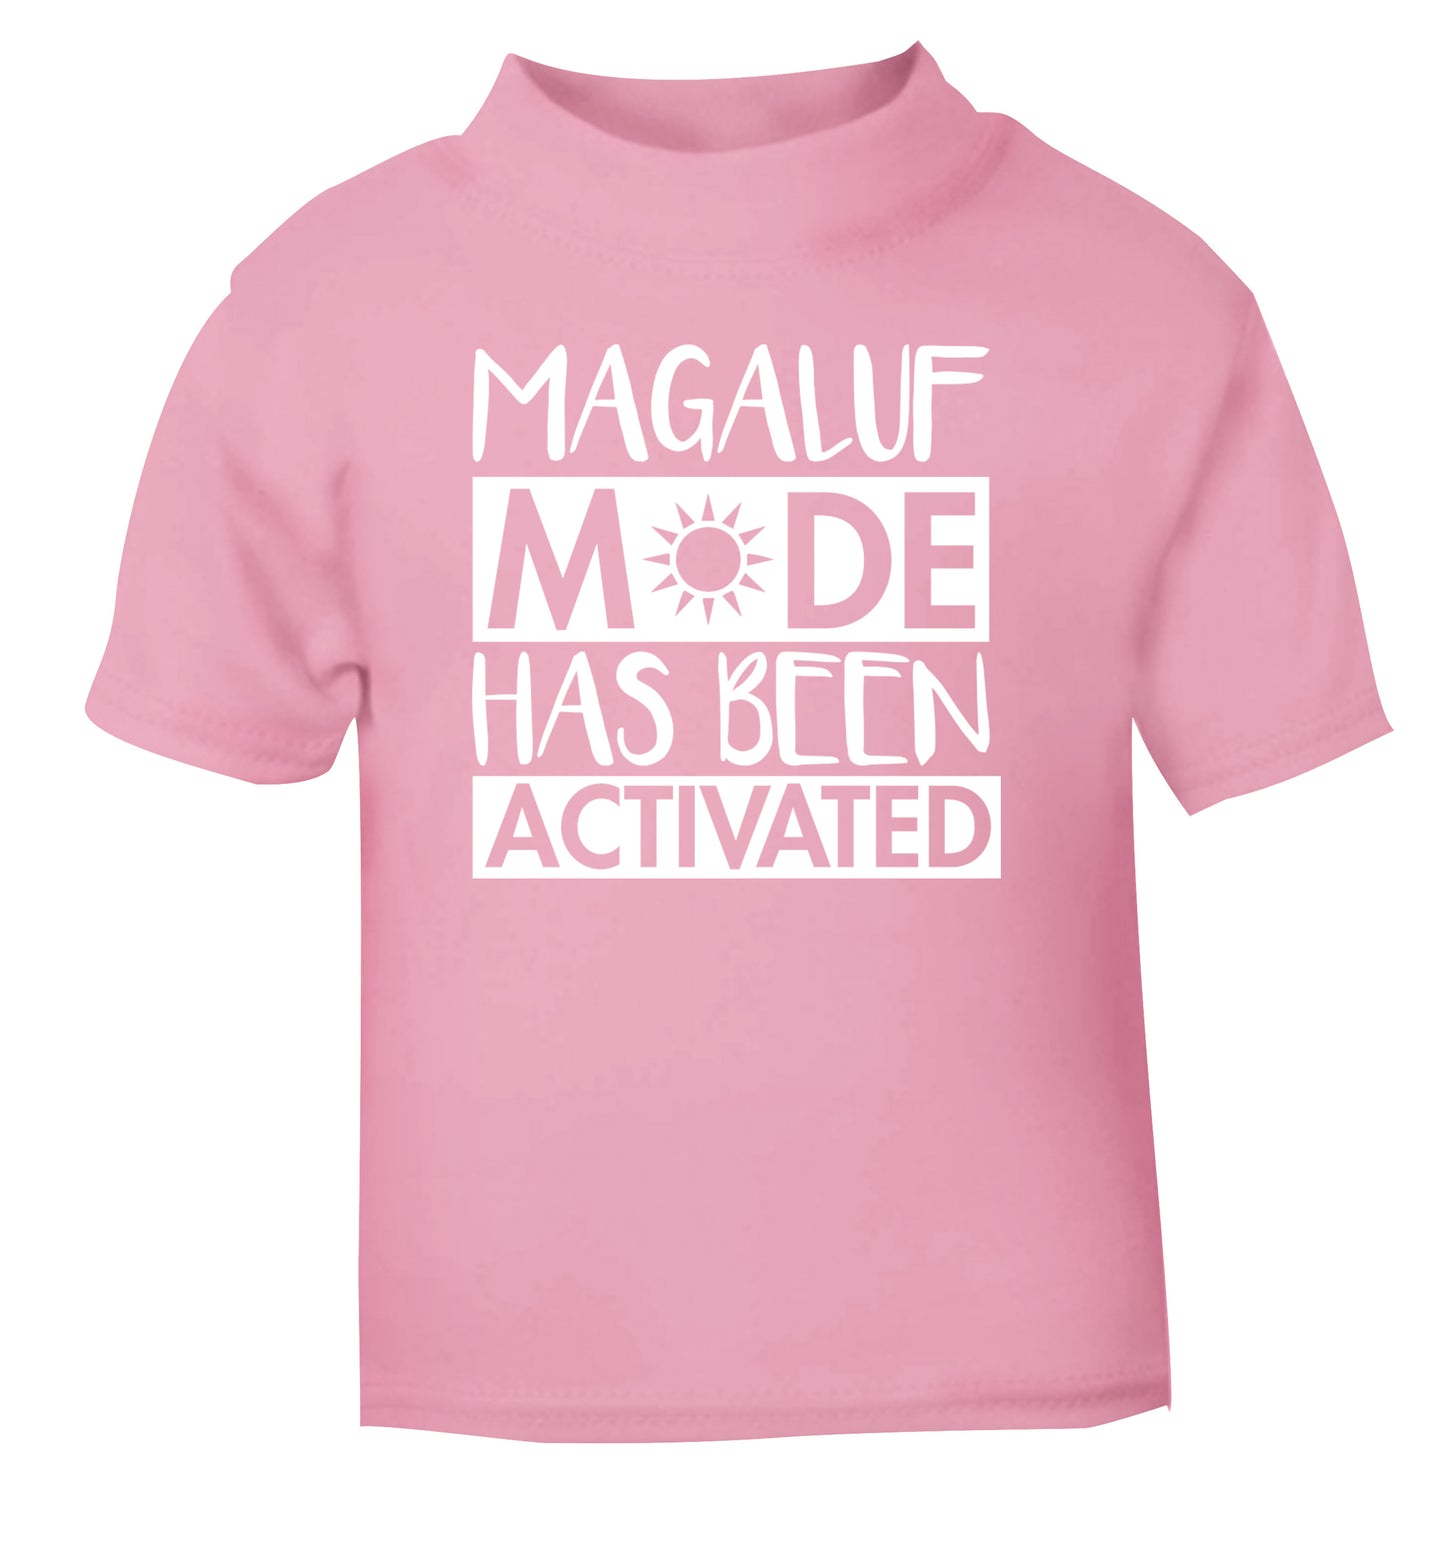 Magaluf mode has been activated light pink Baby Toddler Tshirt 2 Years